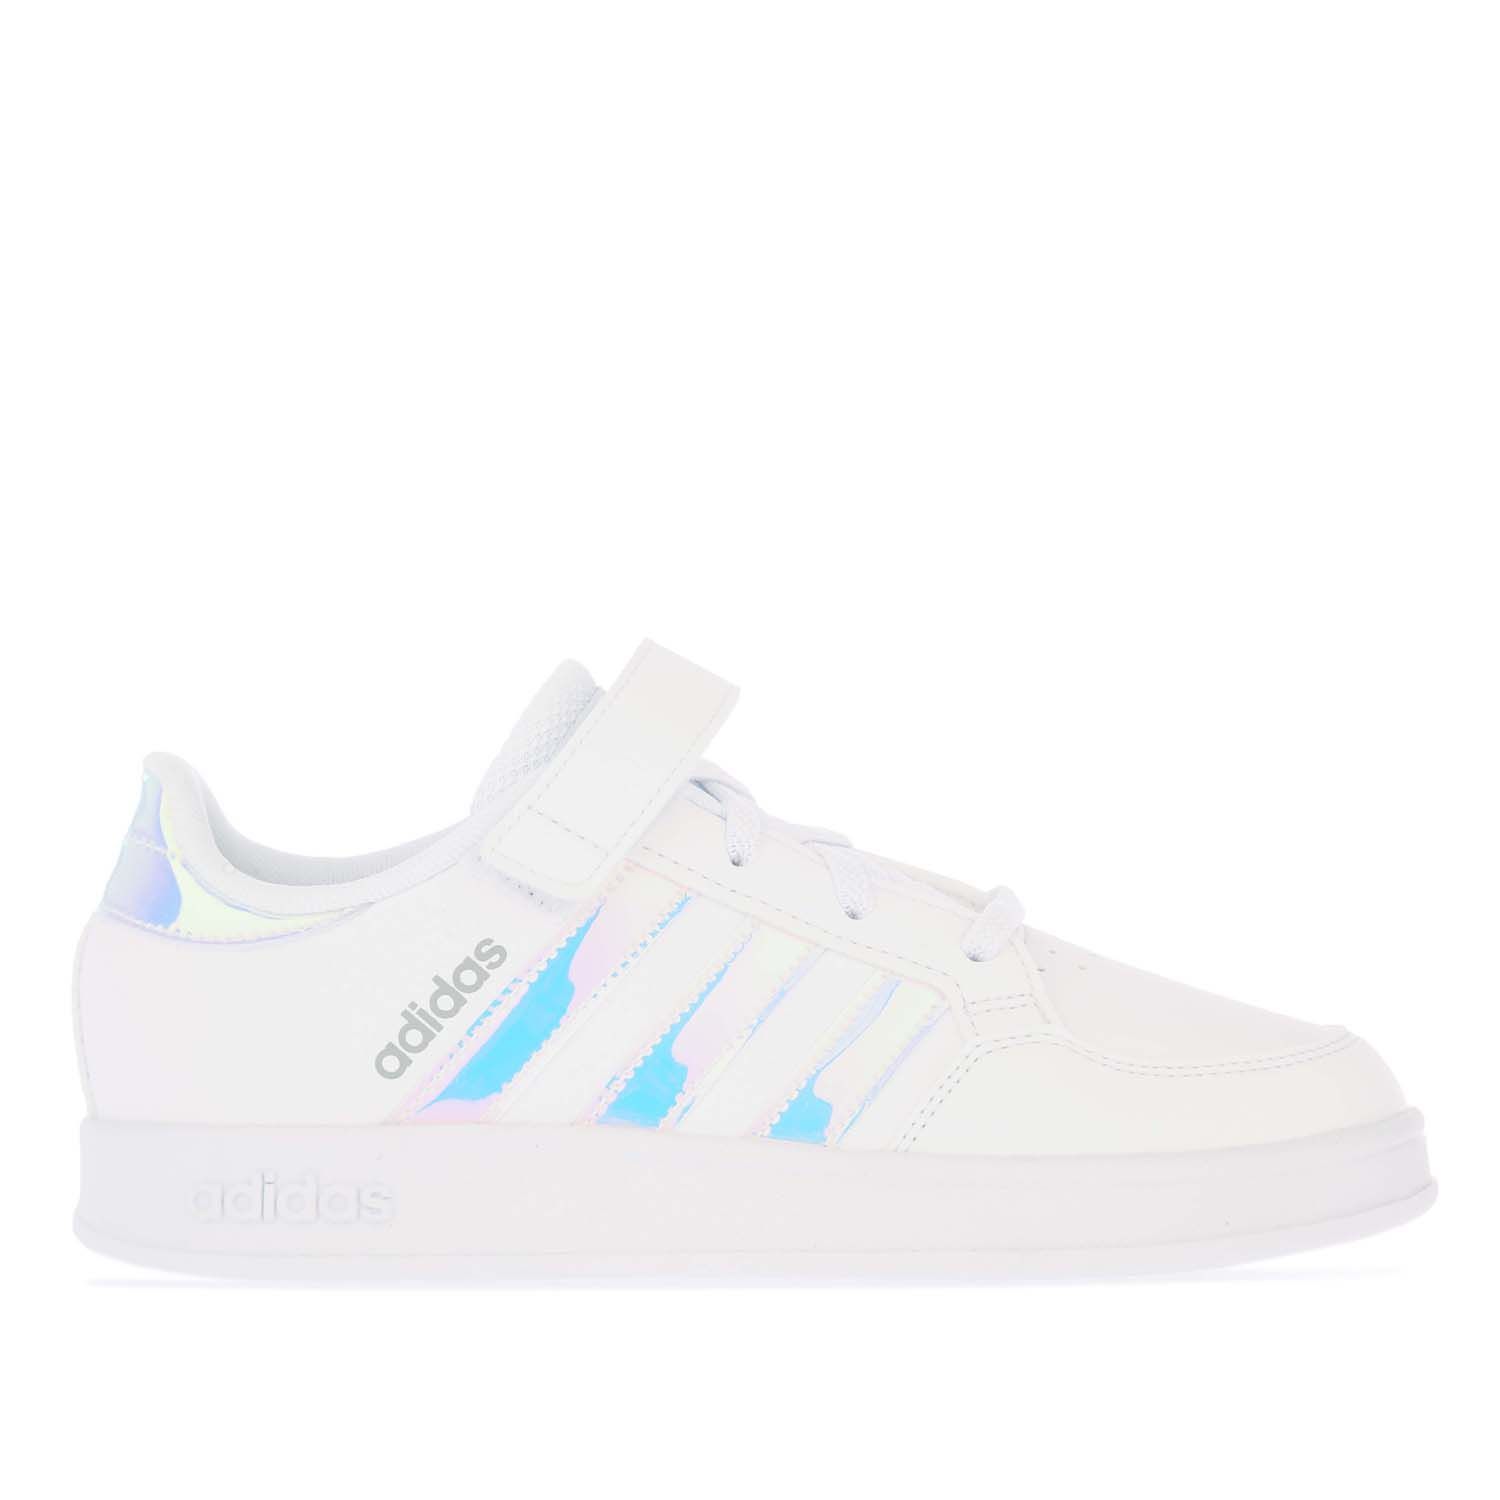 Children adidas Breaknet Trainers in white.- Synthetic upper.- Lace closure with hook-and-loop top strap.- Iconic 3-Stripes.- Retro tennis-inspired design. - EVA sockliner. - Rubber outsole. - Synthetic upper  Textile lining  Synthetic sole. - Ref: GW2326